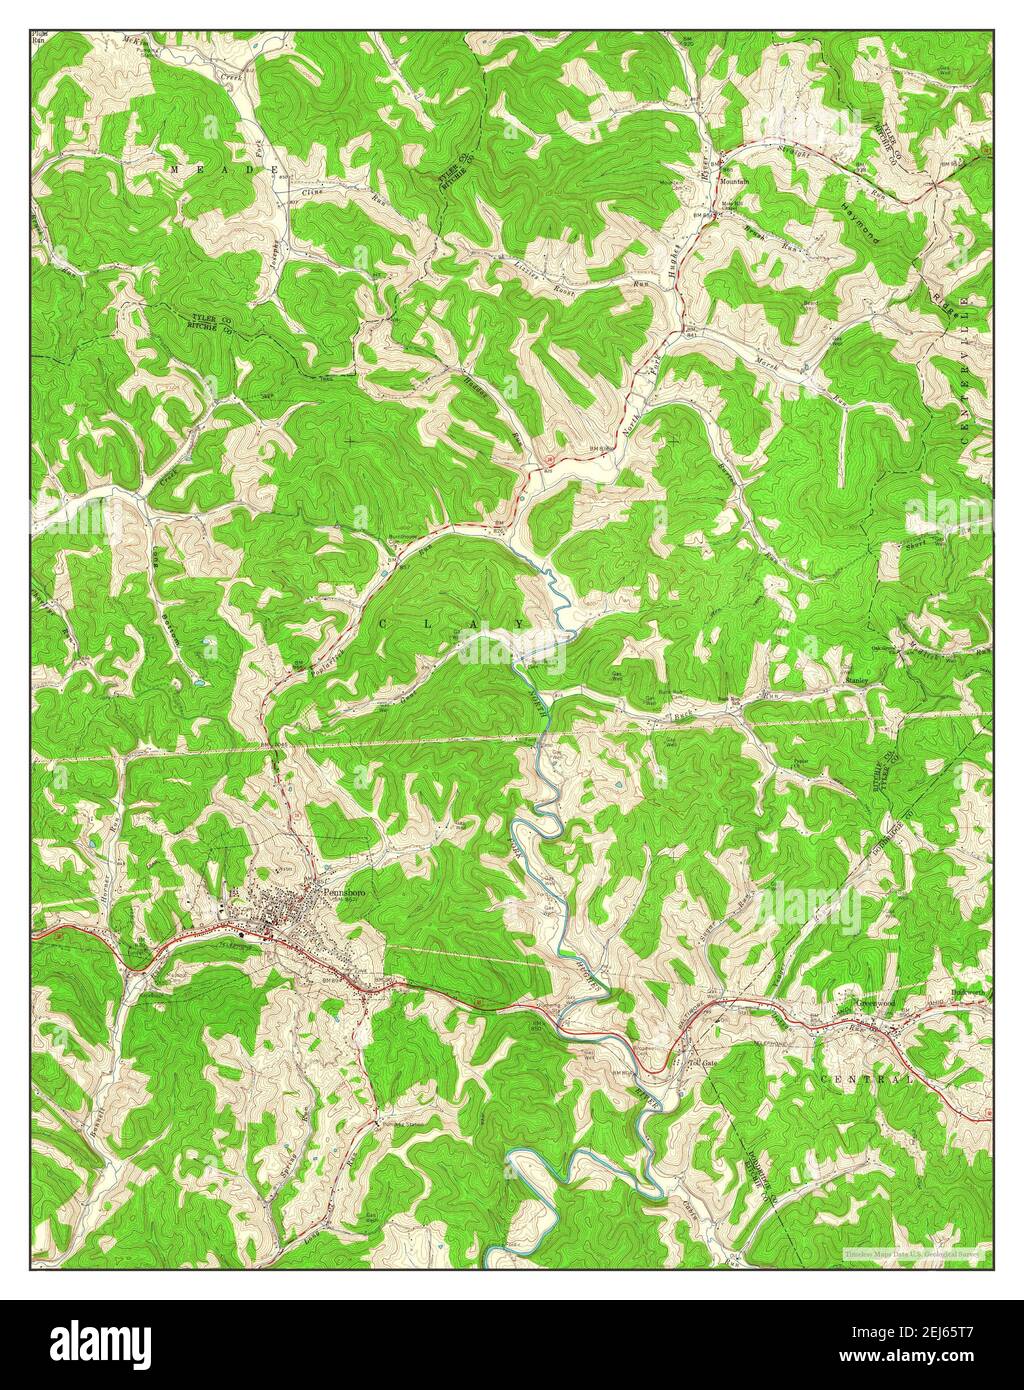 Pennsboro, West Virginia, map 1961, 1:24000, United States of America by Timeless Maps, data U.S. Geological Survey Stock Photo